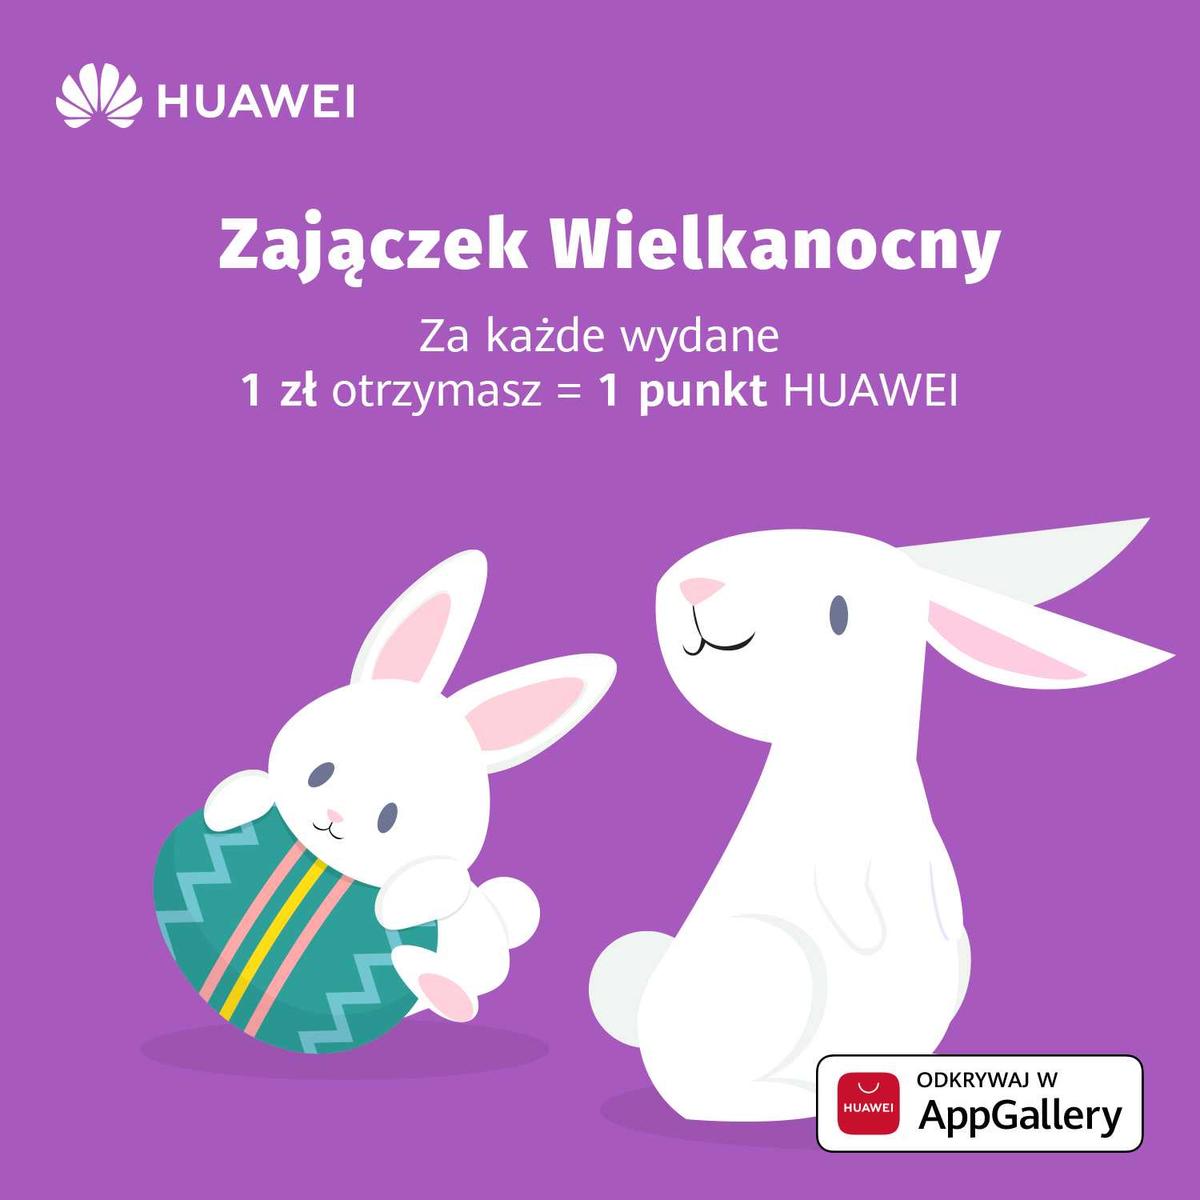 huawei appgallery promocja punkty class="wp-image-1125331" 